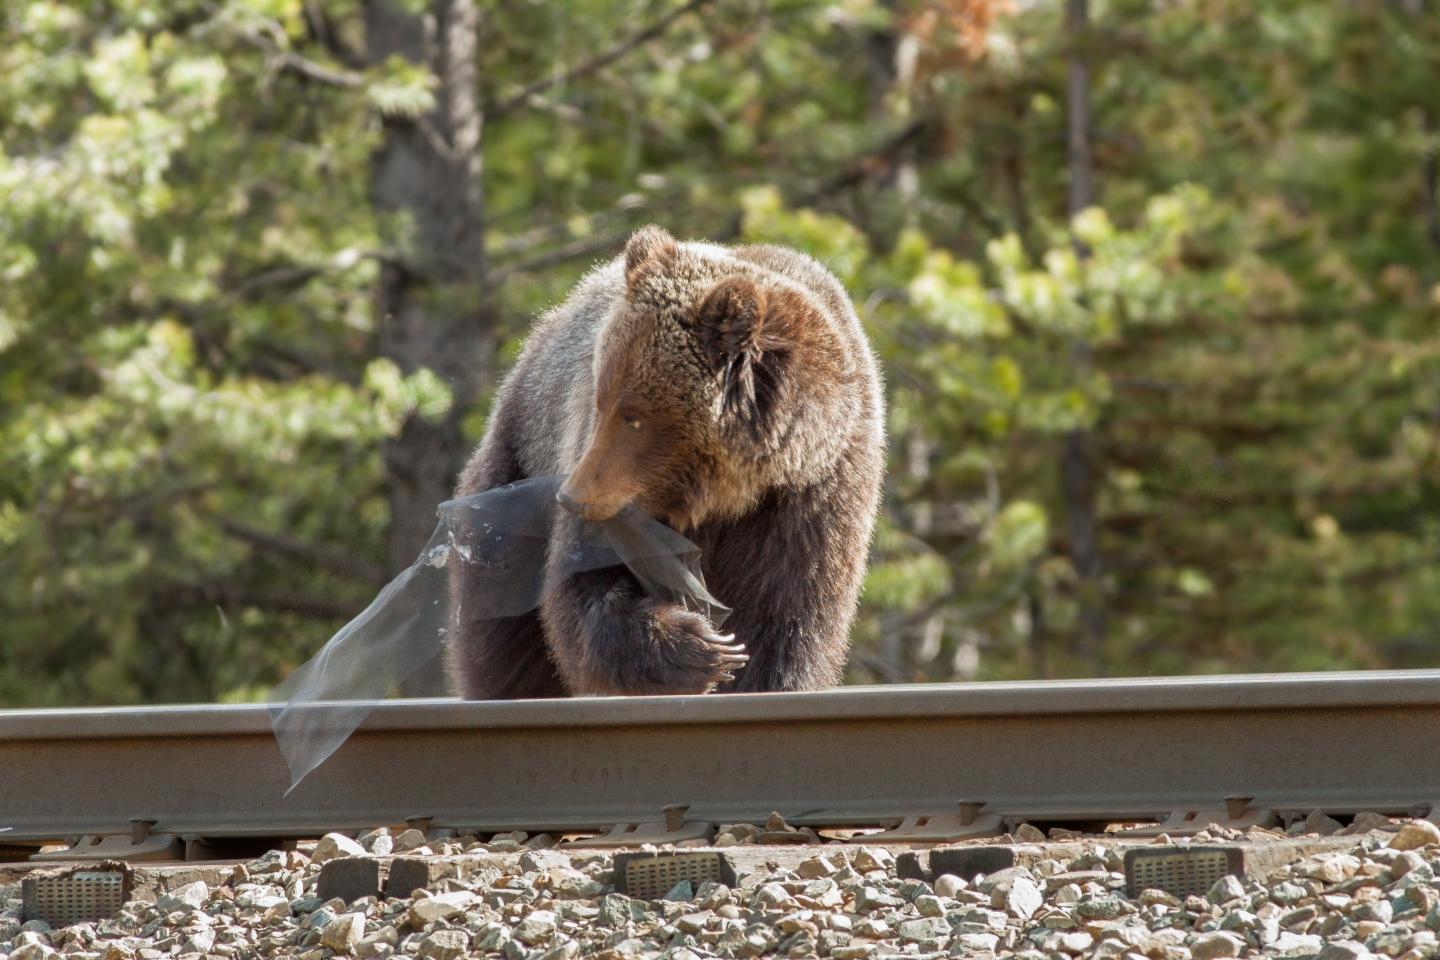 Some Grizzly Bears Appear to Target Railways for Foraging in Canadian National Parks